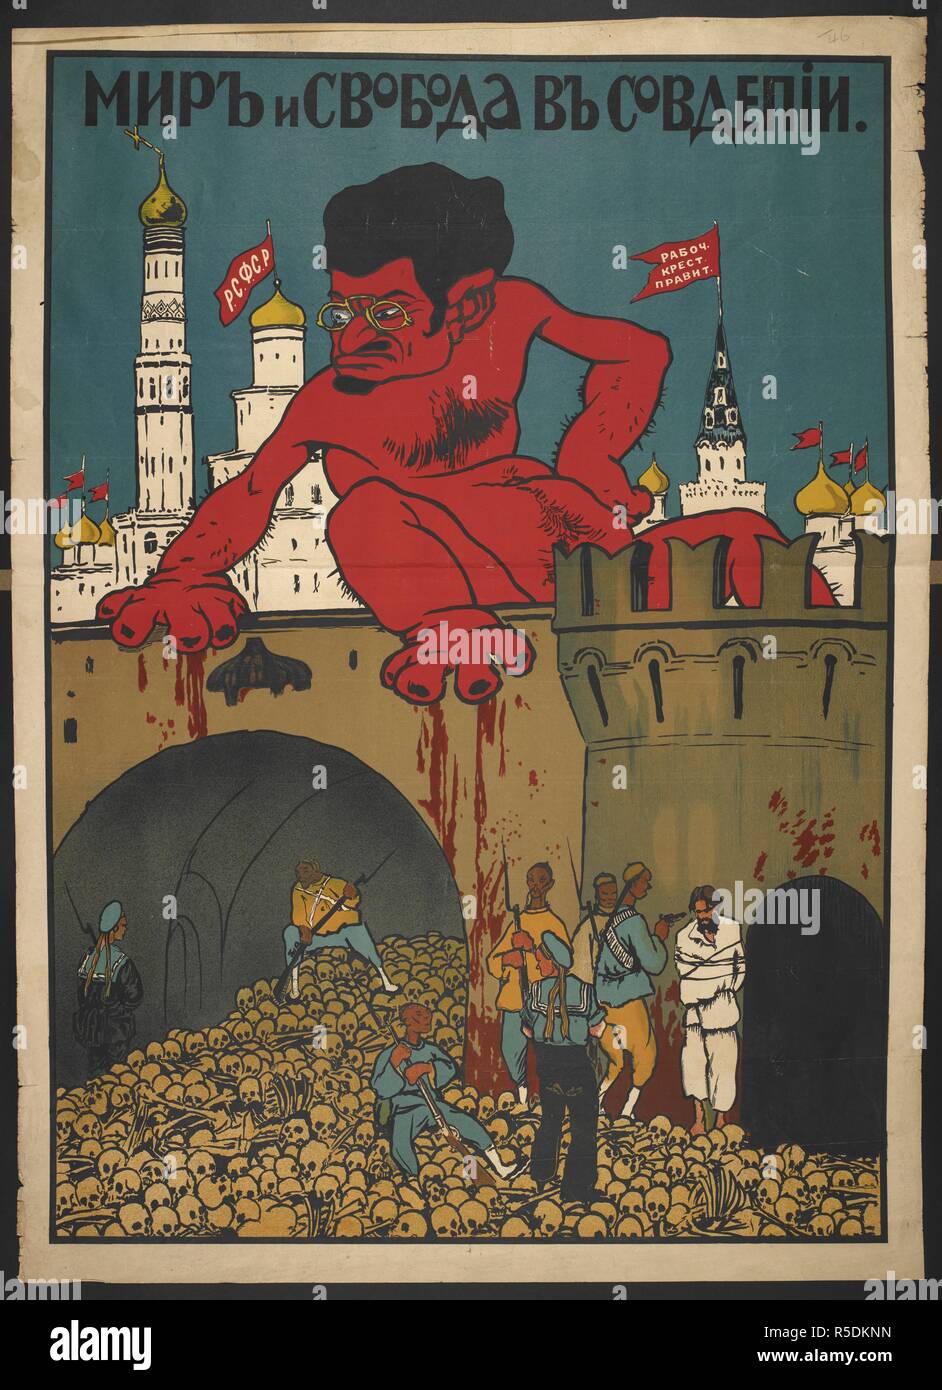 A Cartoon Against Trotsky And The Red Army Dœd N Ns D N D D D D D D D Ns D D D D Dµd N D Peace And Freedom In Soviet Russia 19 Source 1856 G 2 46 Stock Photo Alamy